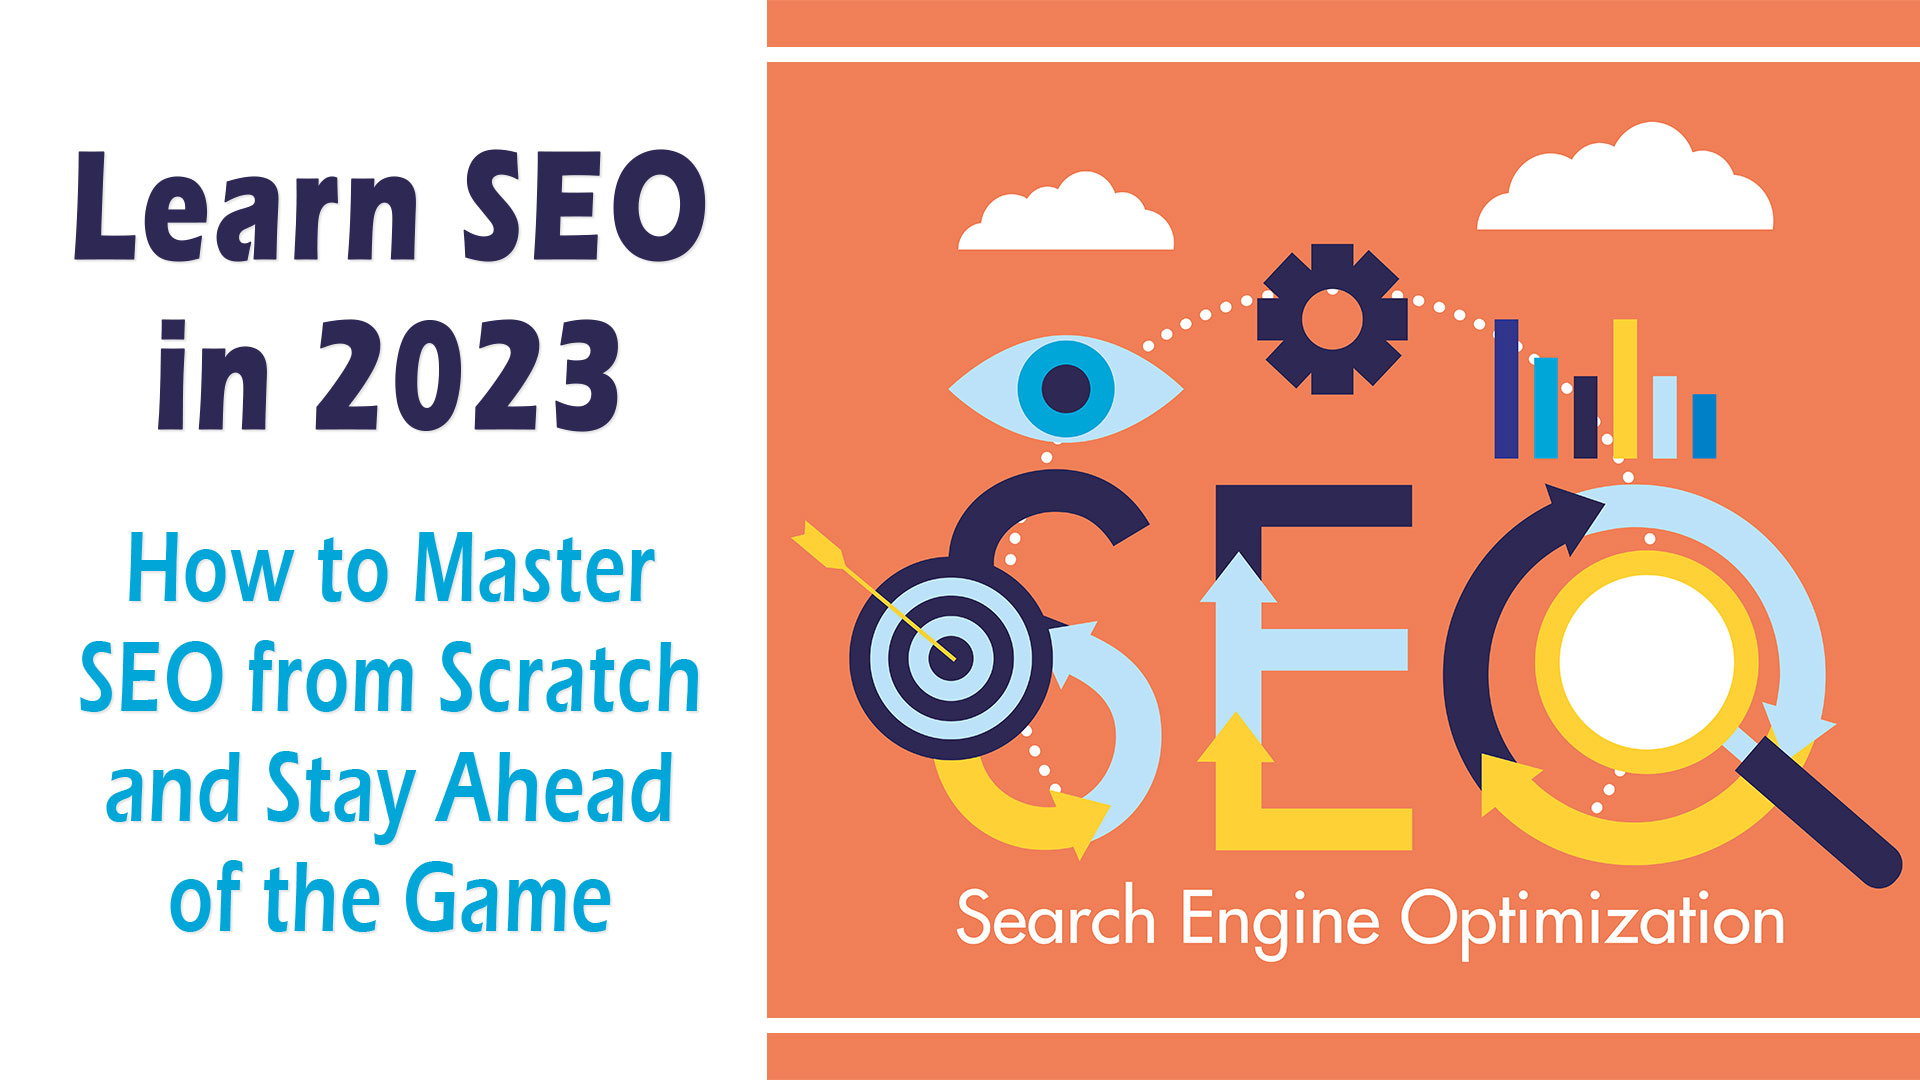 Learn SEO in 2023: How to Master SEO from Scratch and Stay Ahead of the Game